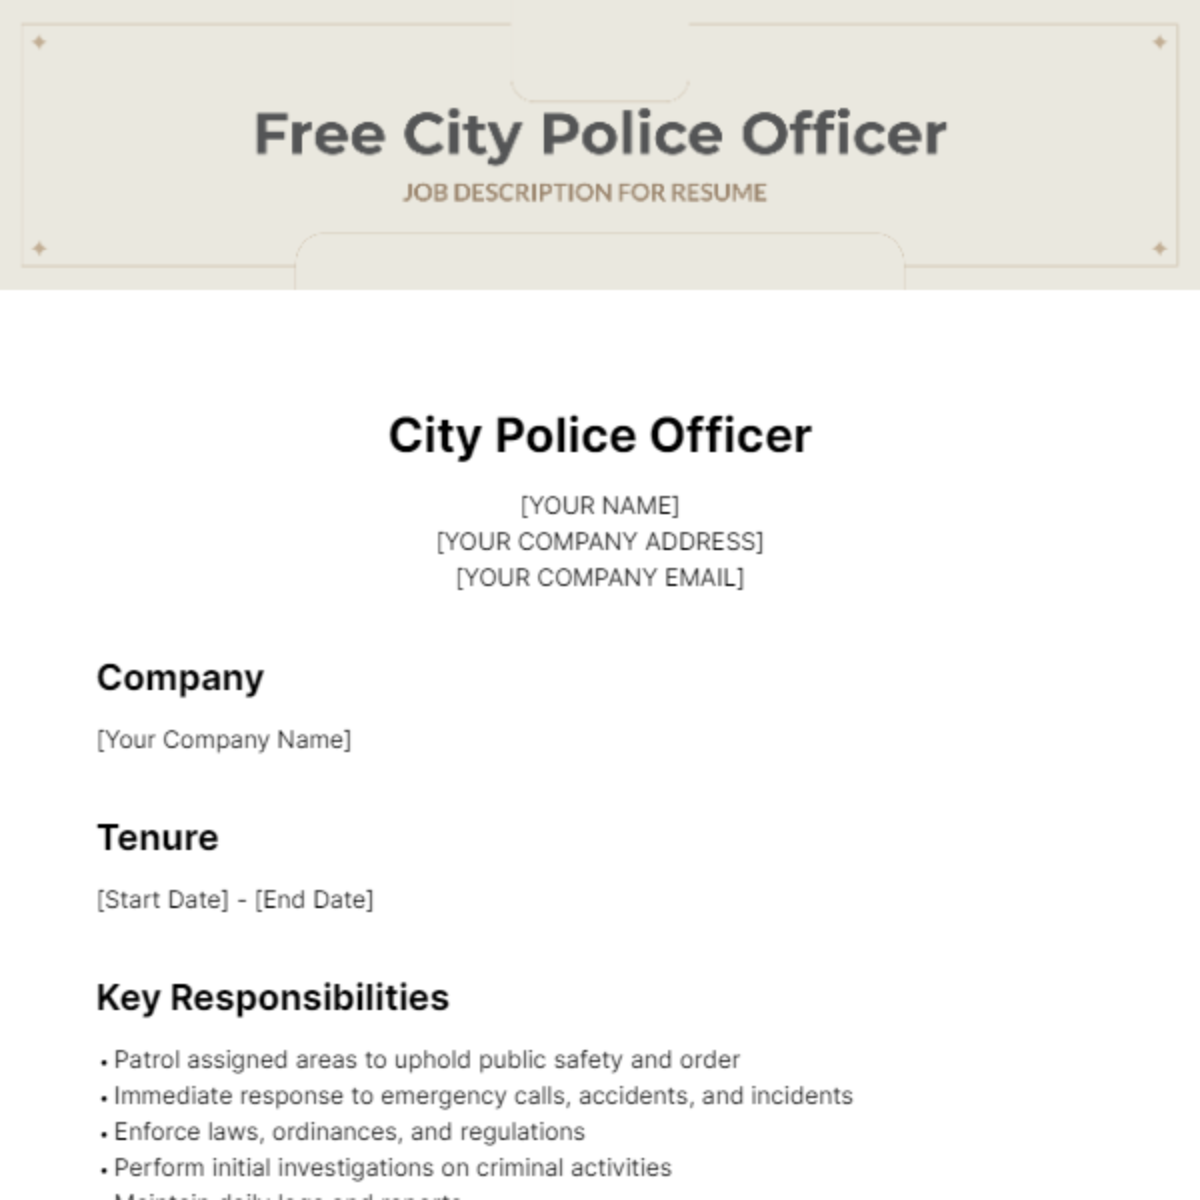 Free City Police Officer Job Description with Resume Template